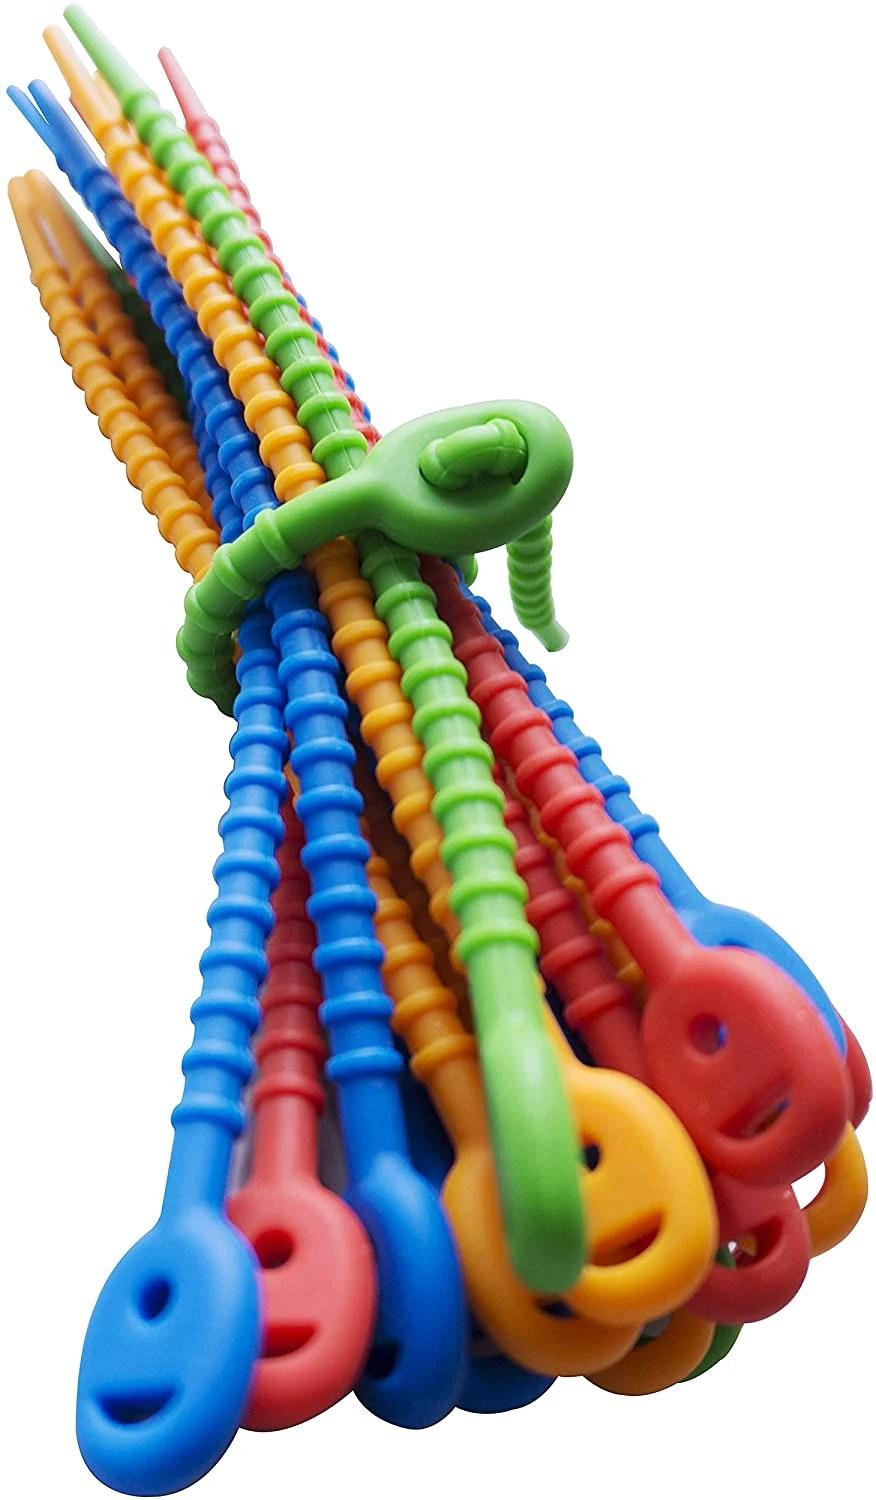 Colorful Silicone Twist Tie Bag Clip Ties Cable Straps Bread Tie Household Snake Ties